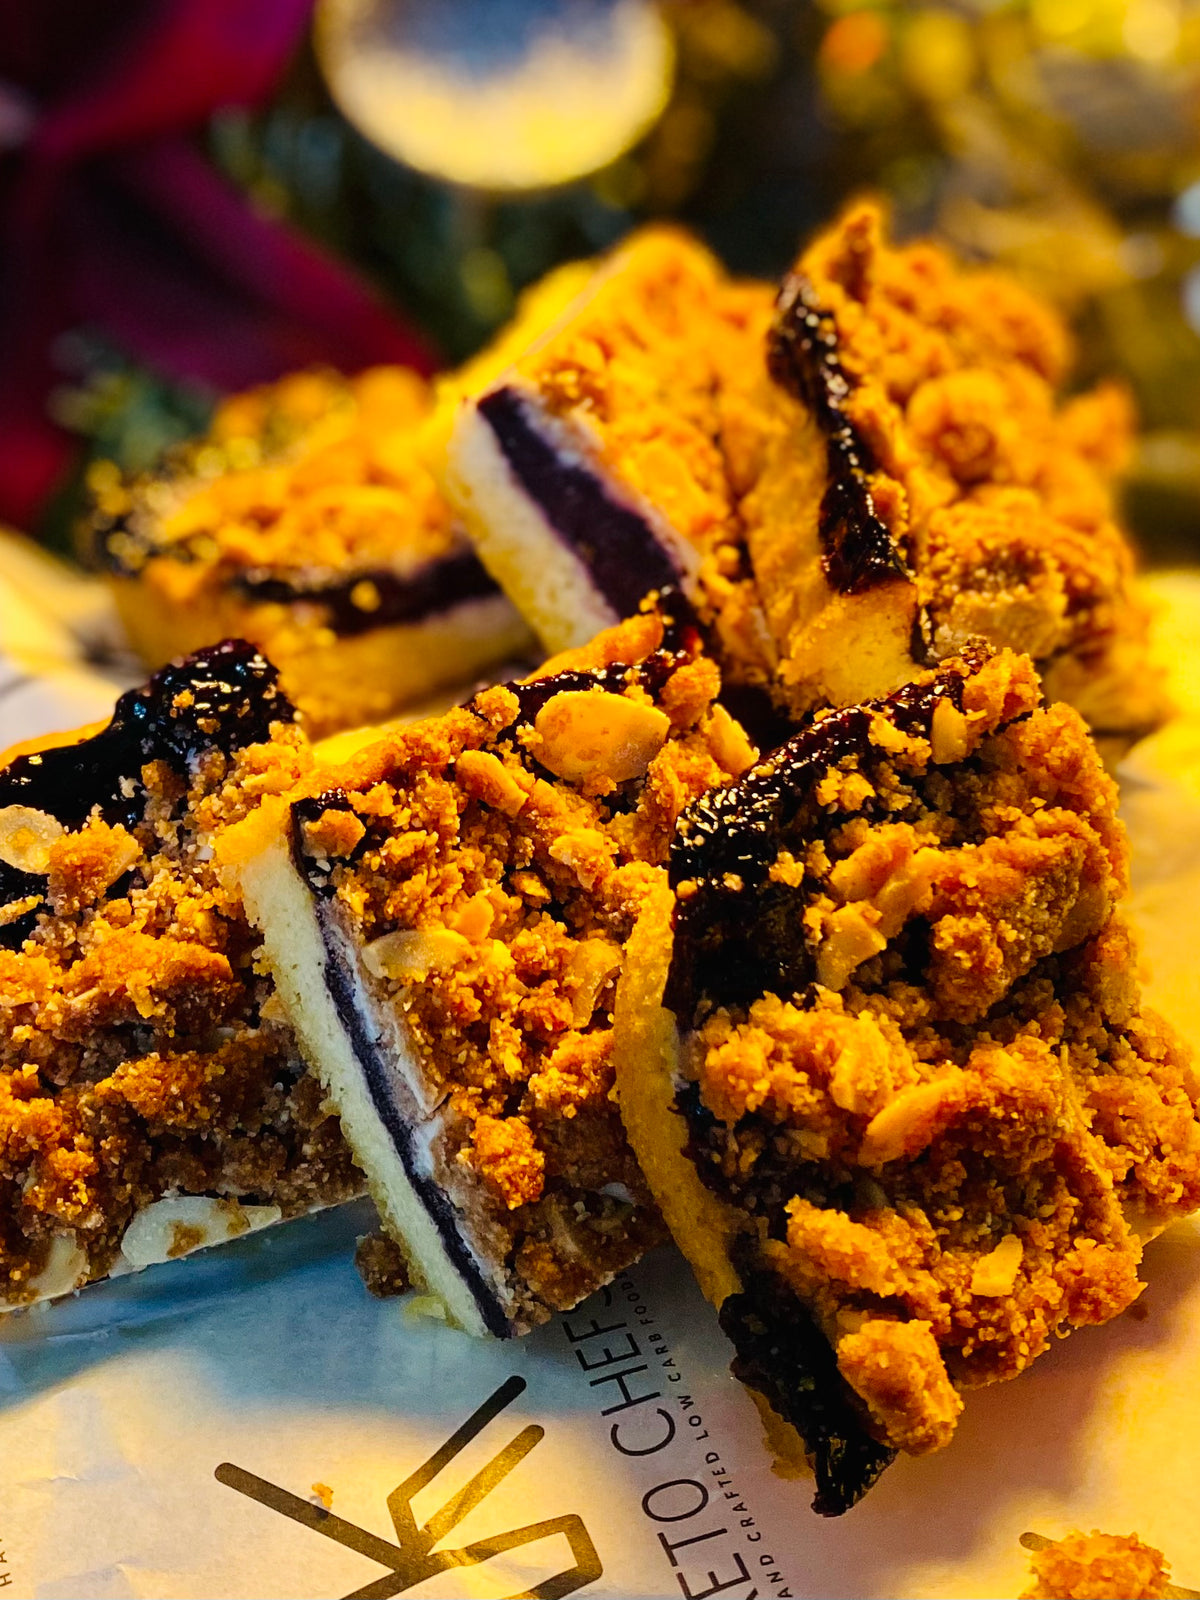 Californian Blueberry Tray Bake Topped with Flaked Almond & Cinnamon Crumble 6/8 Portions (FREEZER FRIENDLY) 500g